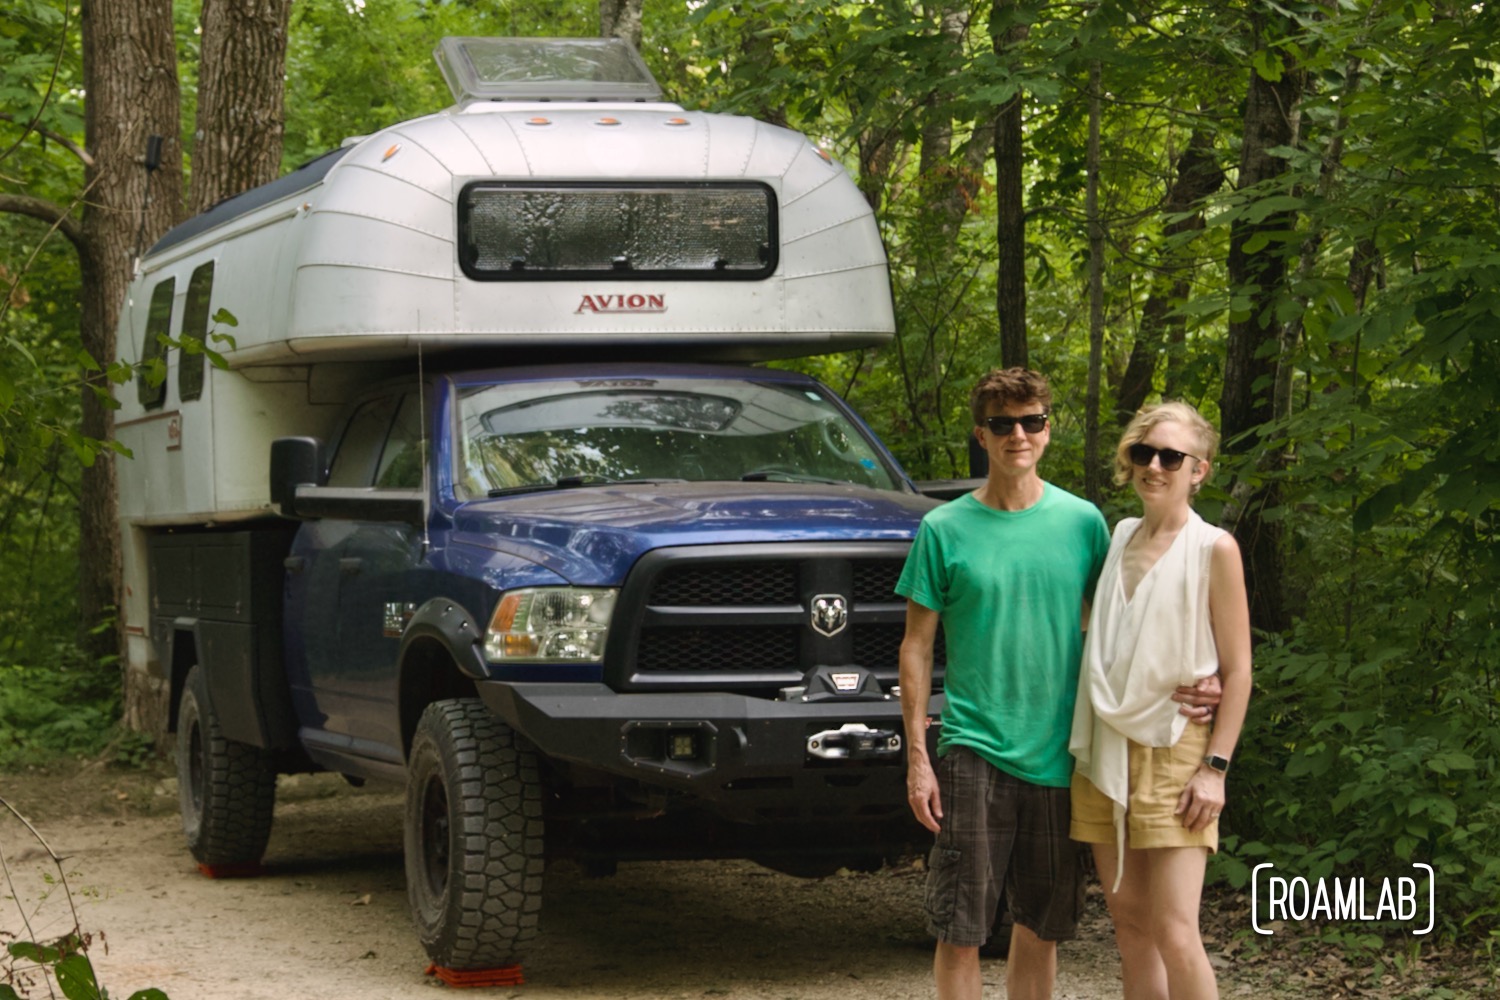 Man and woman standing in front of a vintage truck camper in the forest.